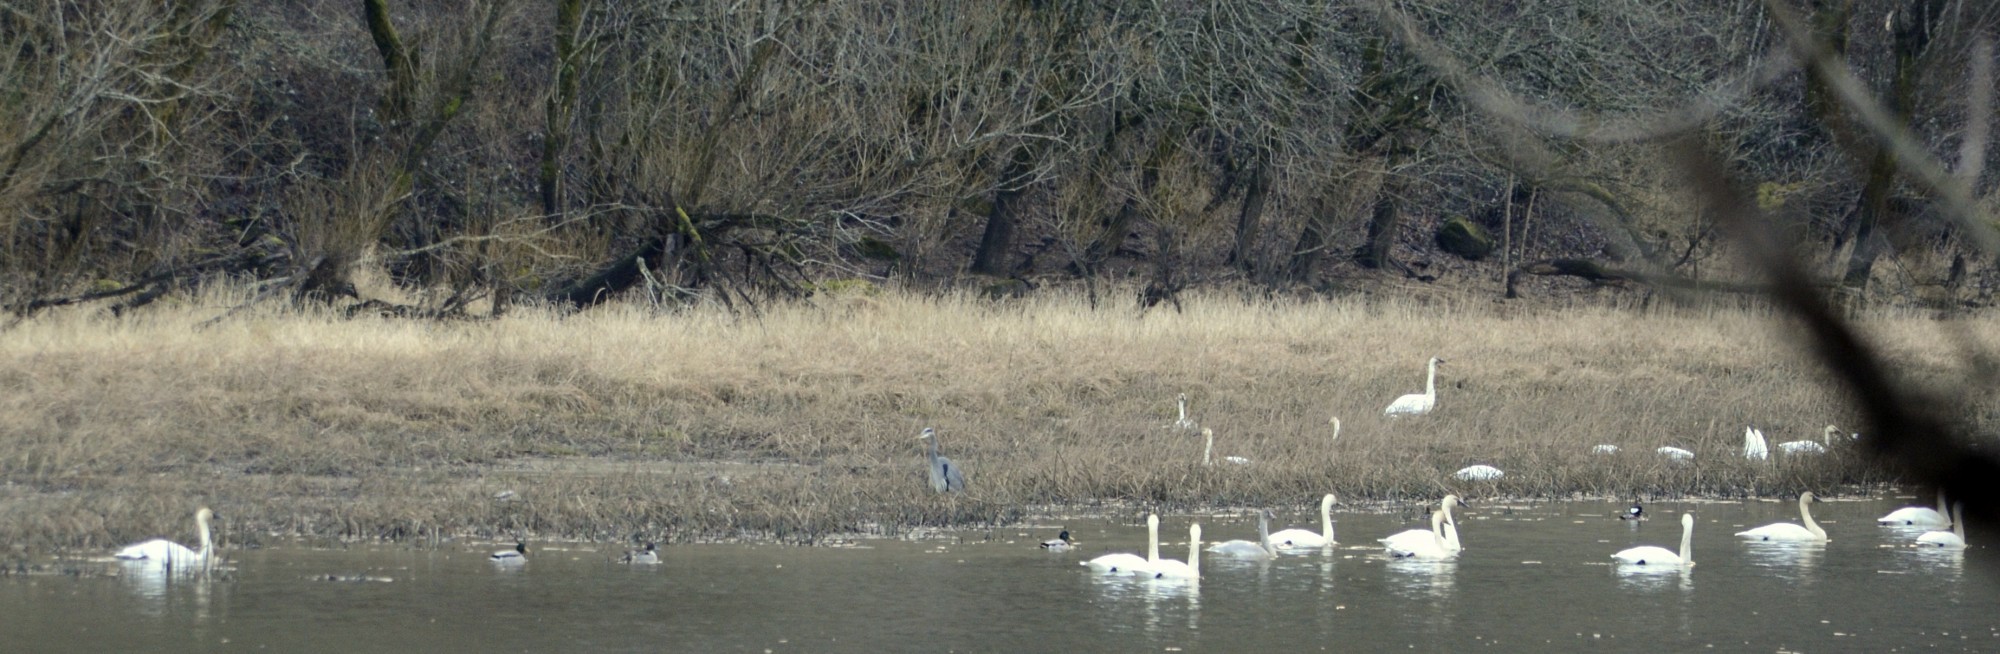 Tundra Swans in the Columbia River Gorge